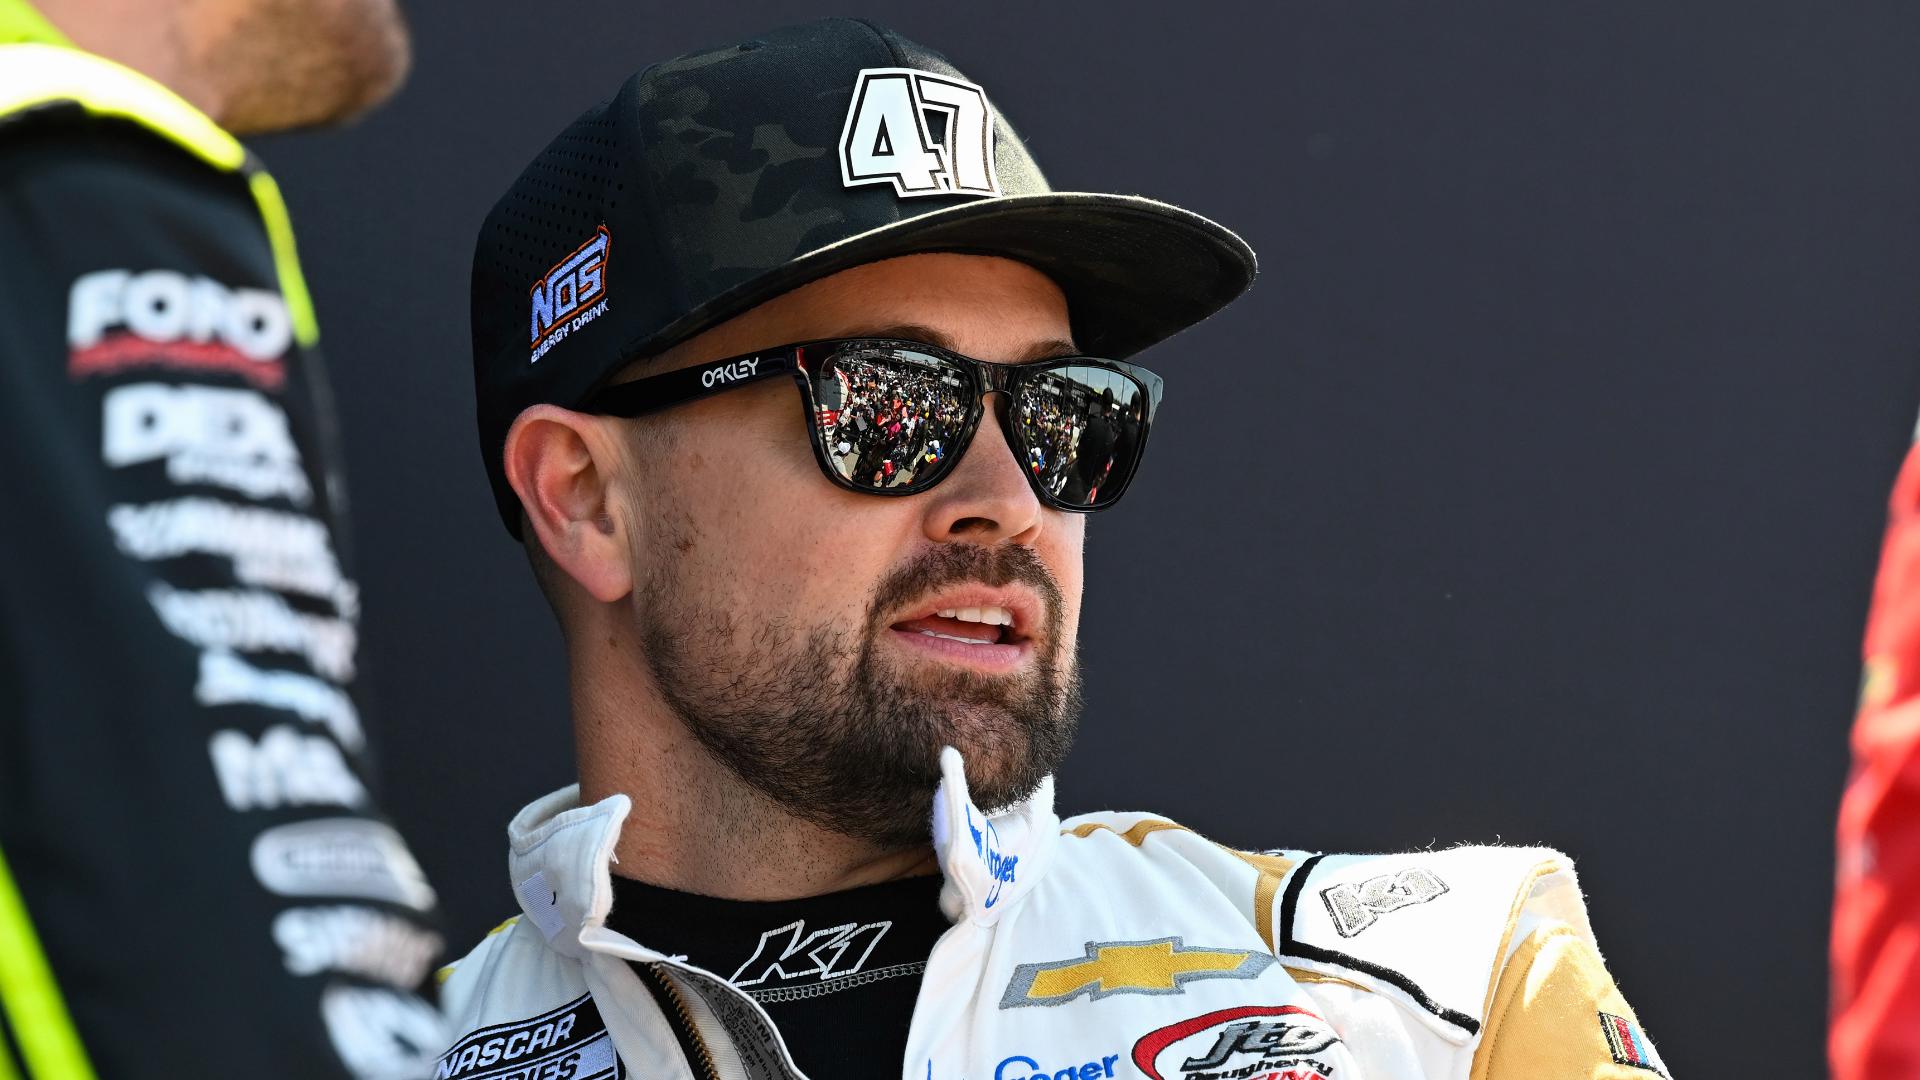 Ricky Stenhouse Jr vows not to retaliate, wreck Kyle Busch at CocaCola